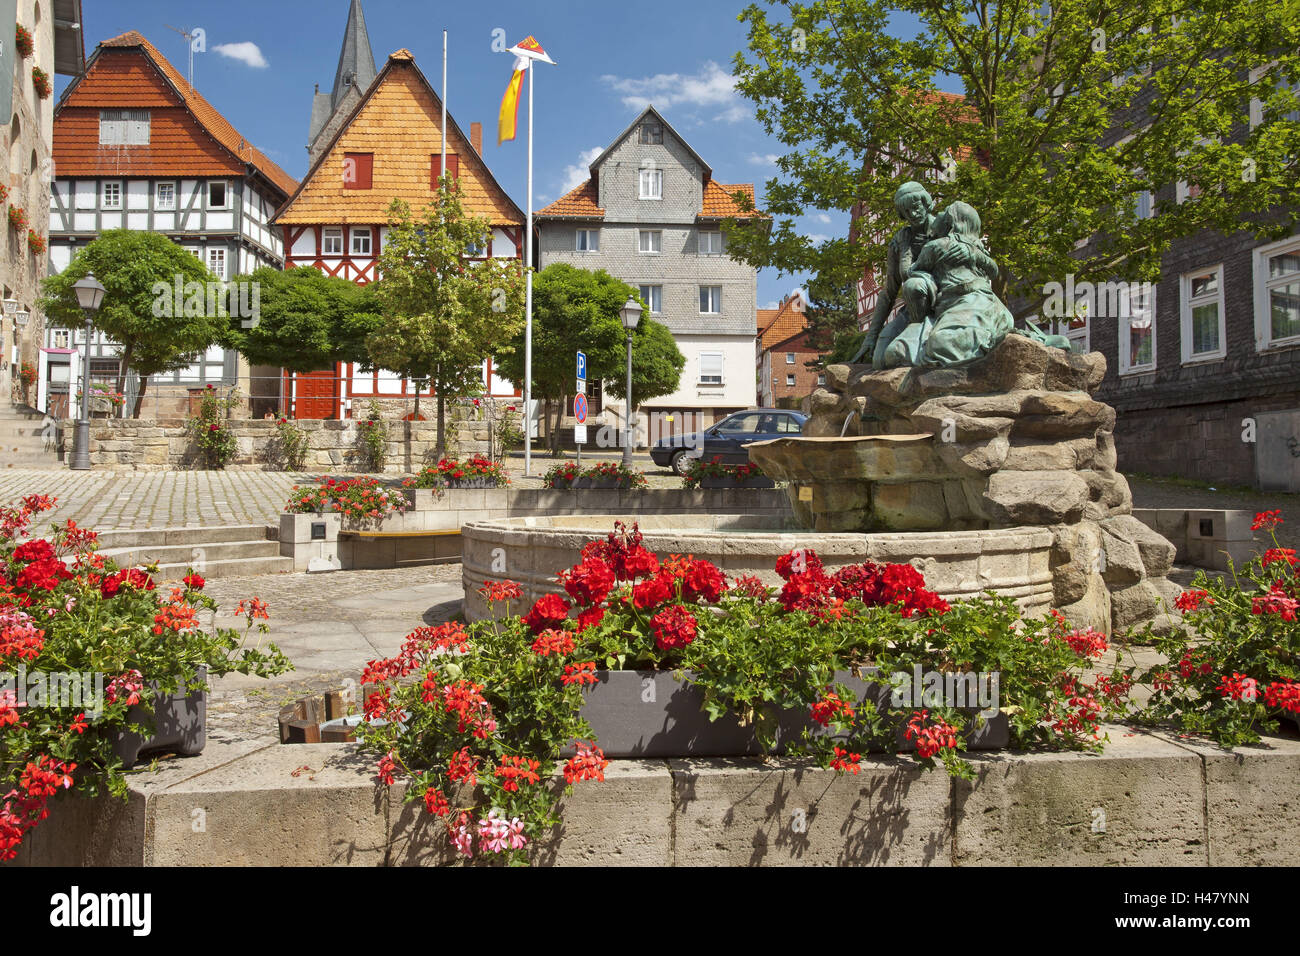 Germany, Hessen, Northern Hessen, Spangenberg, town hall square, fountain, Stock Photo